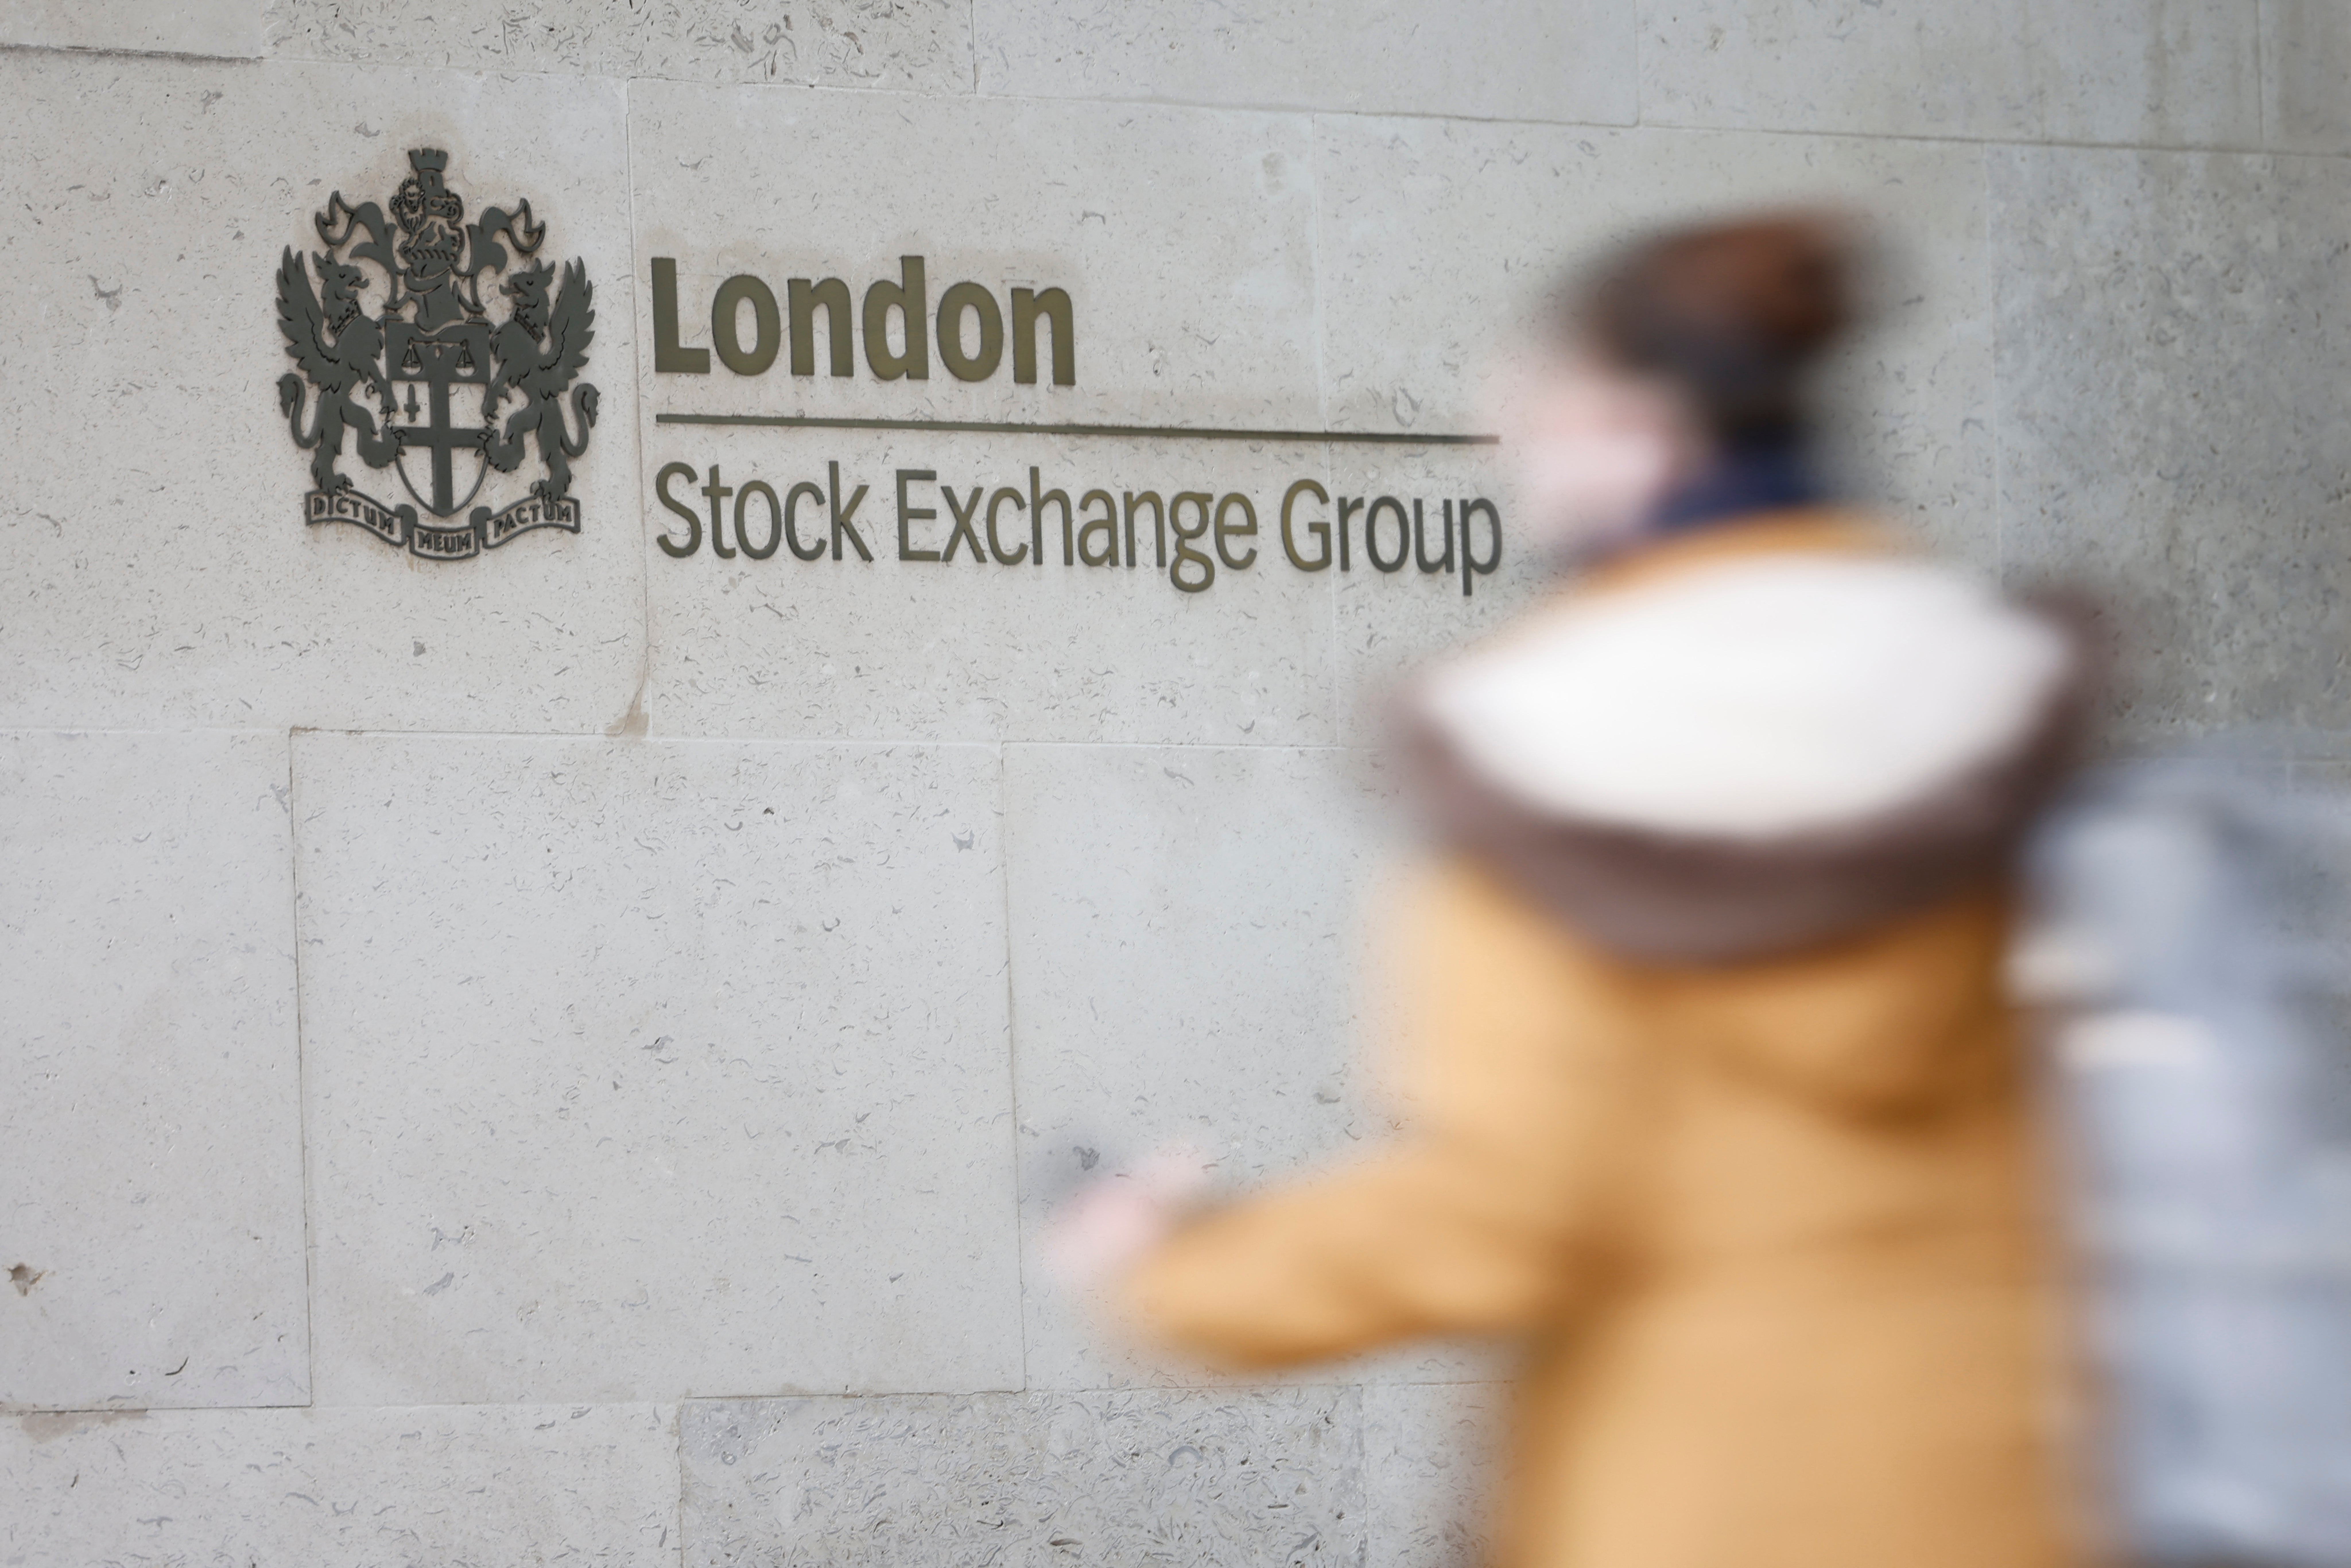 Six people have been arrested in connection to a plot to disrupt the London Stock Exchange on Monday